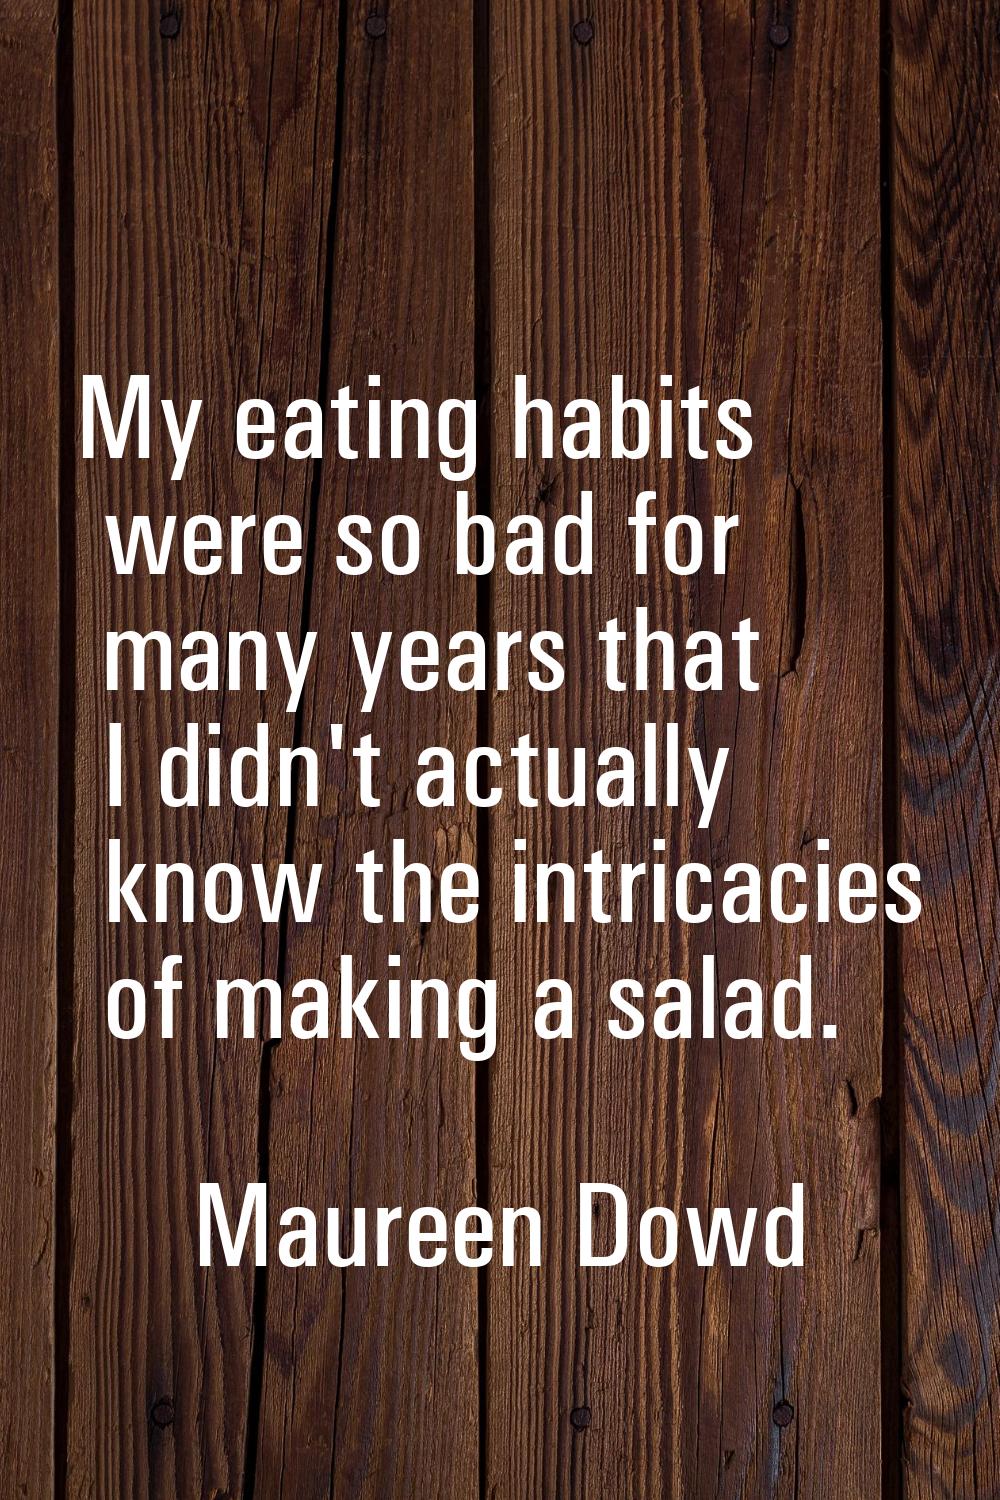 My eating habits were so bad for many years that I didn't actually know the intricacies of making a